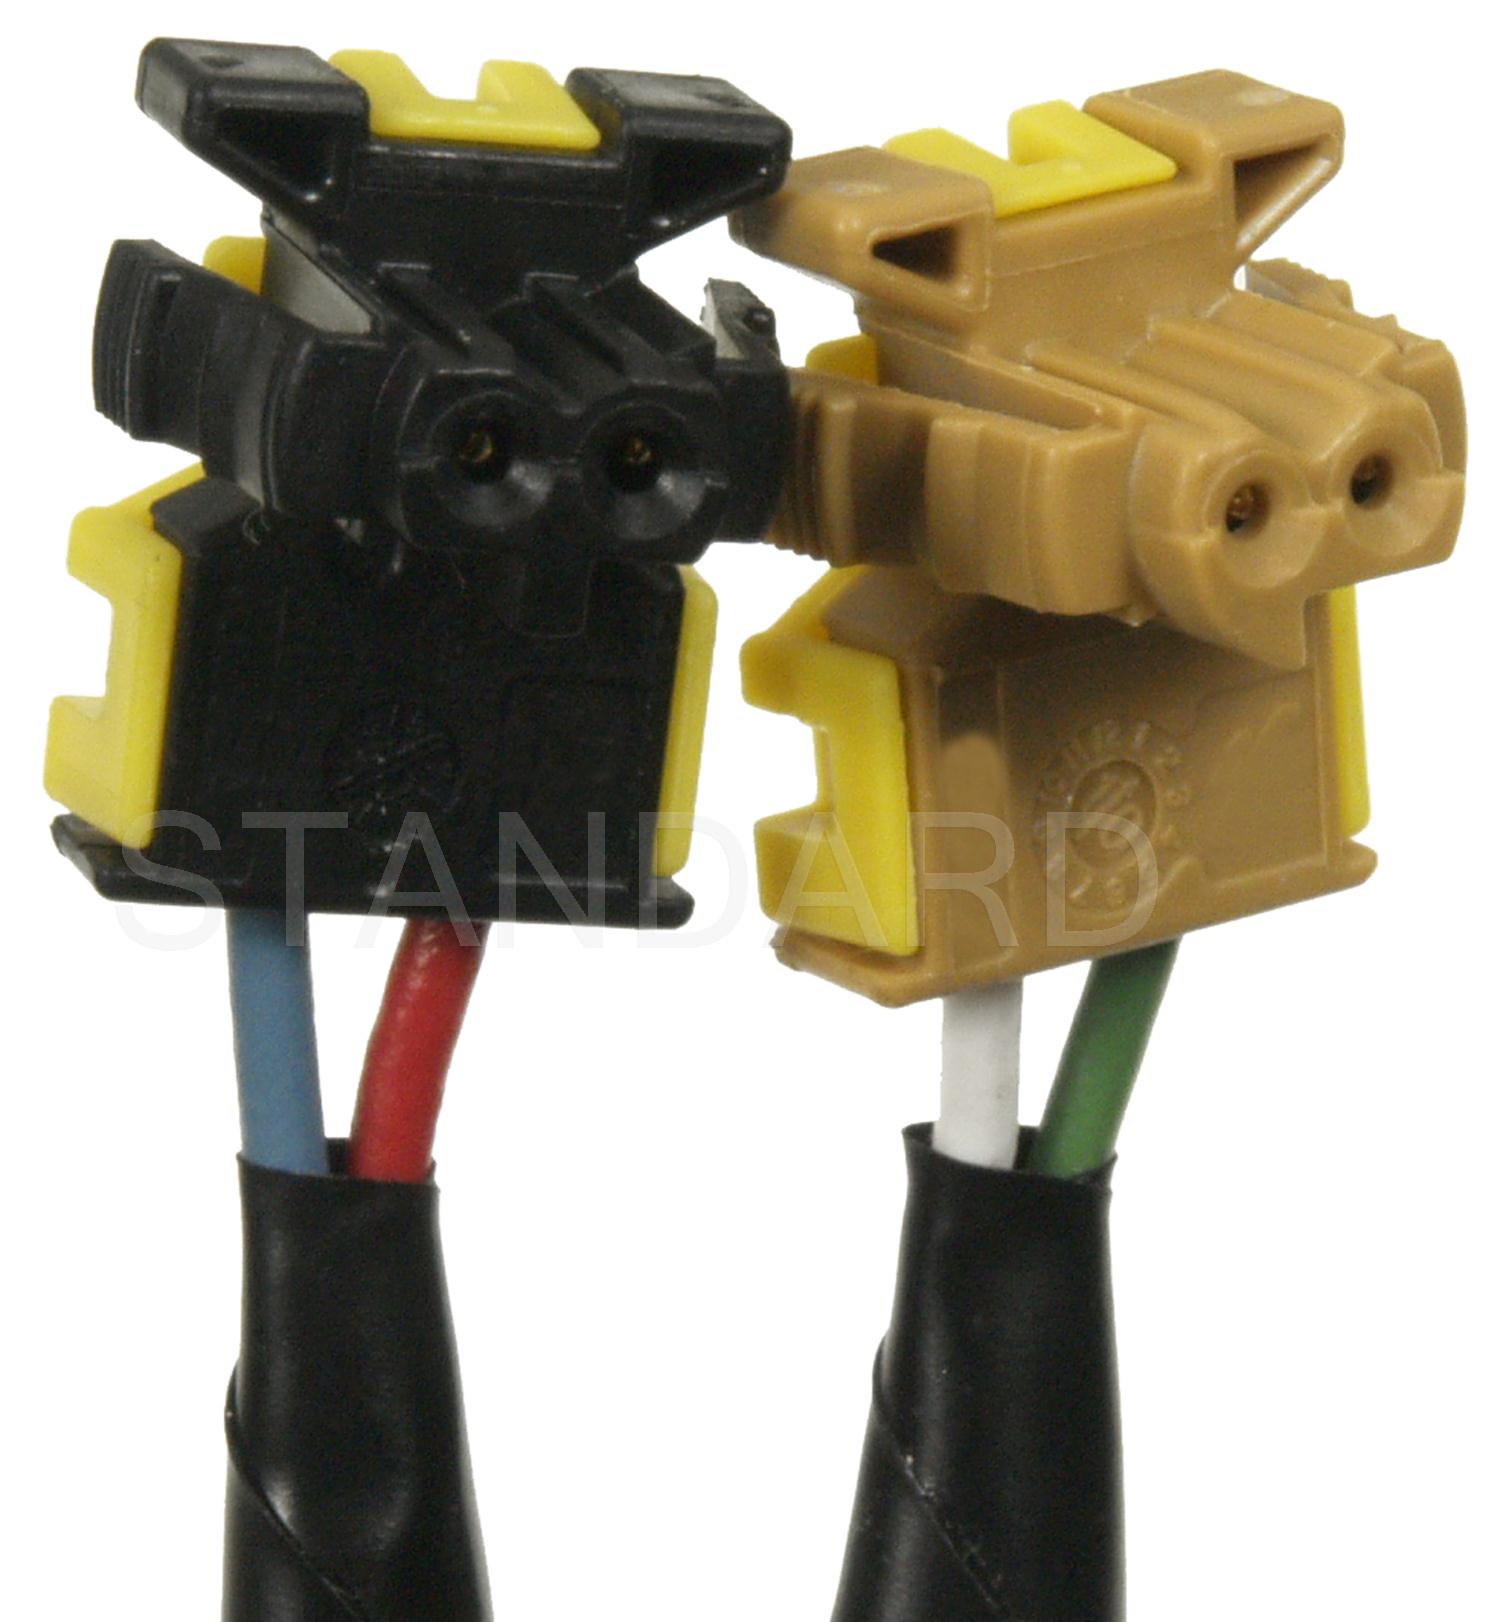 Picture of Standard Motor Products CSP126 Standard Switch - Dimmer